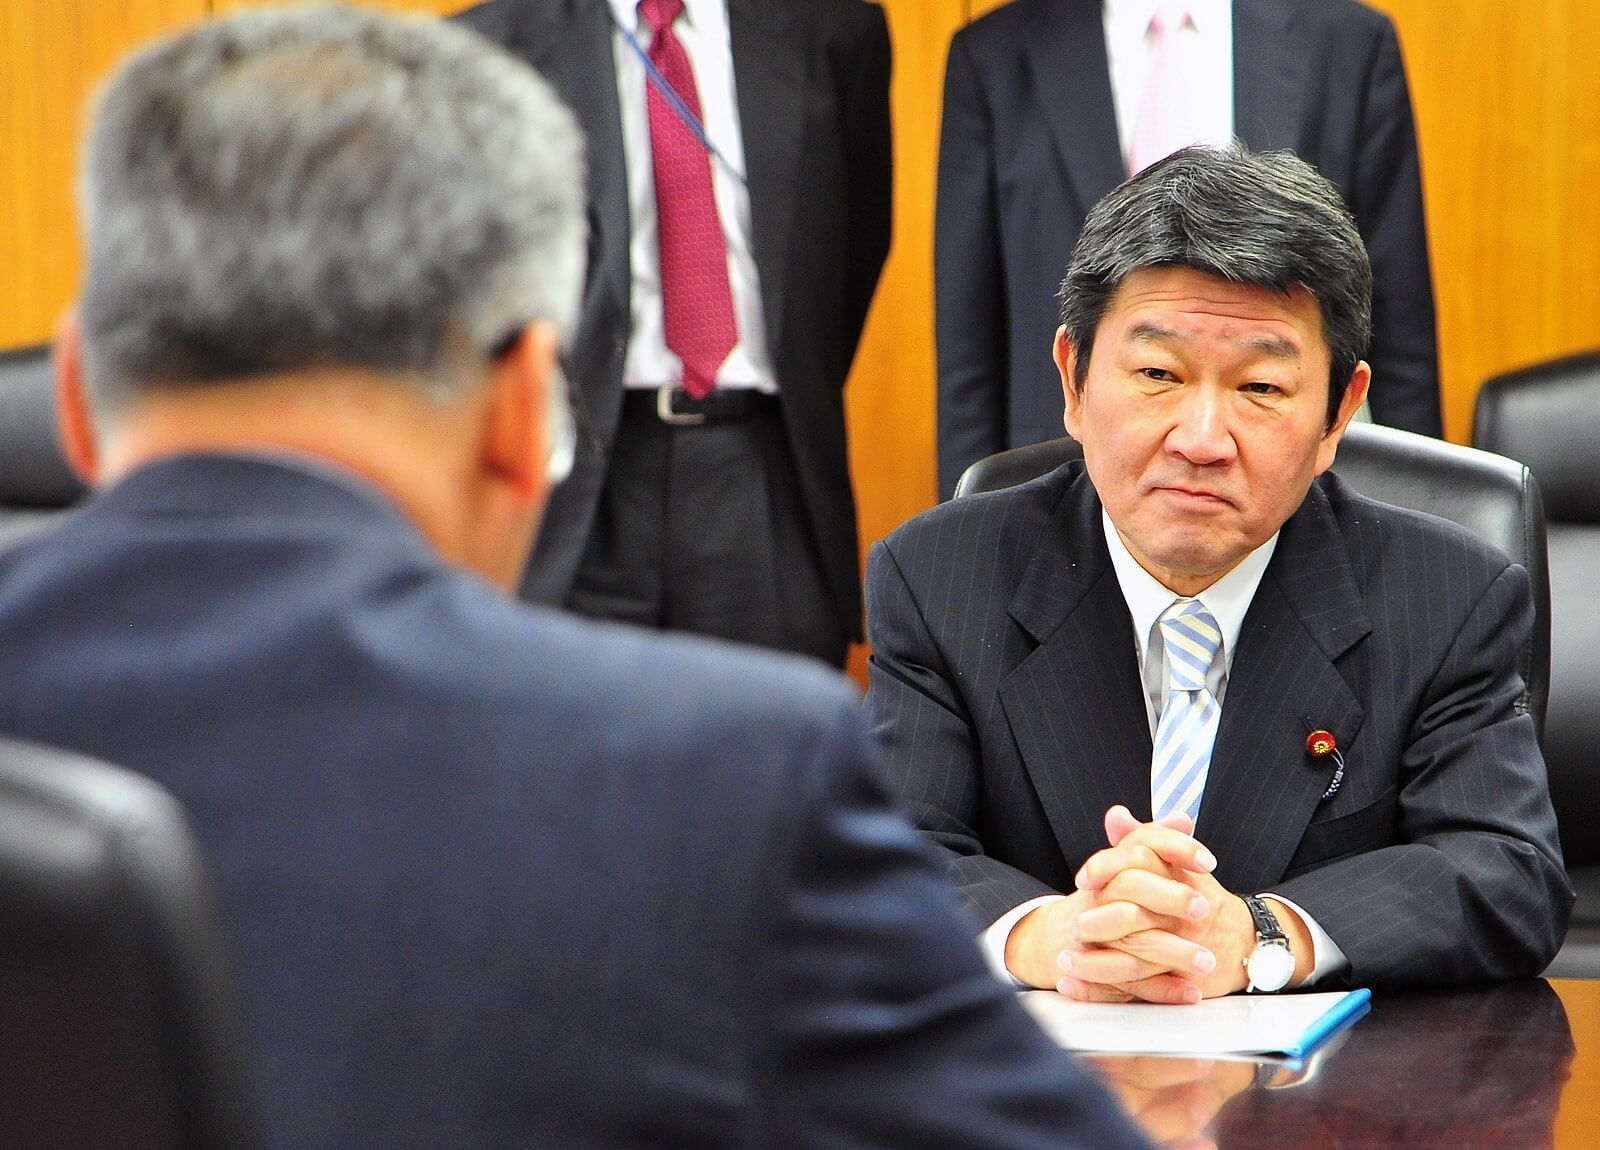 Japan FM Motegi Promotes Free and Open Indo-Pacific at EU Foreign Affairs Council